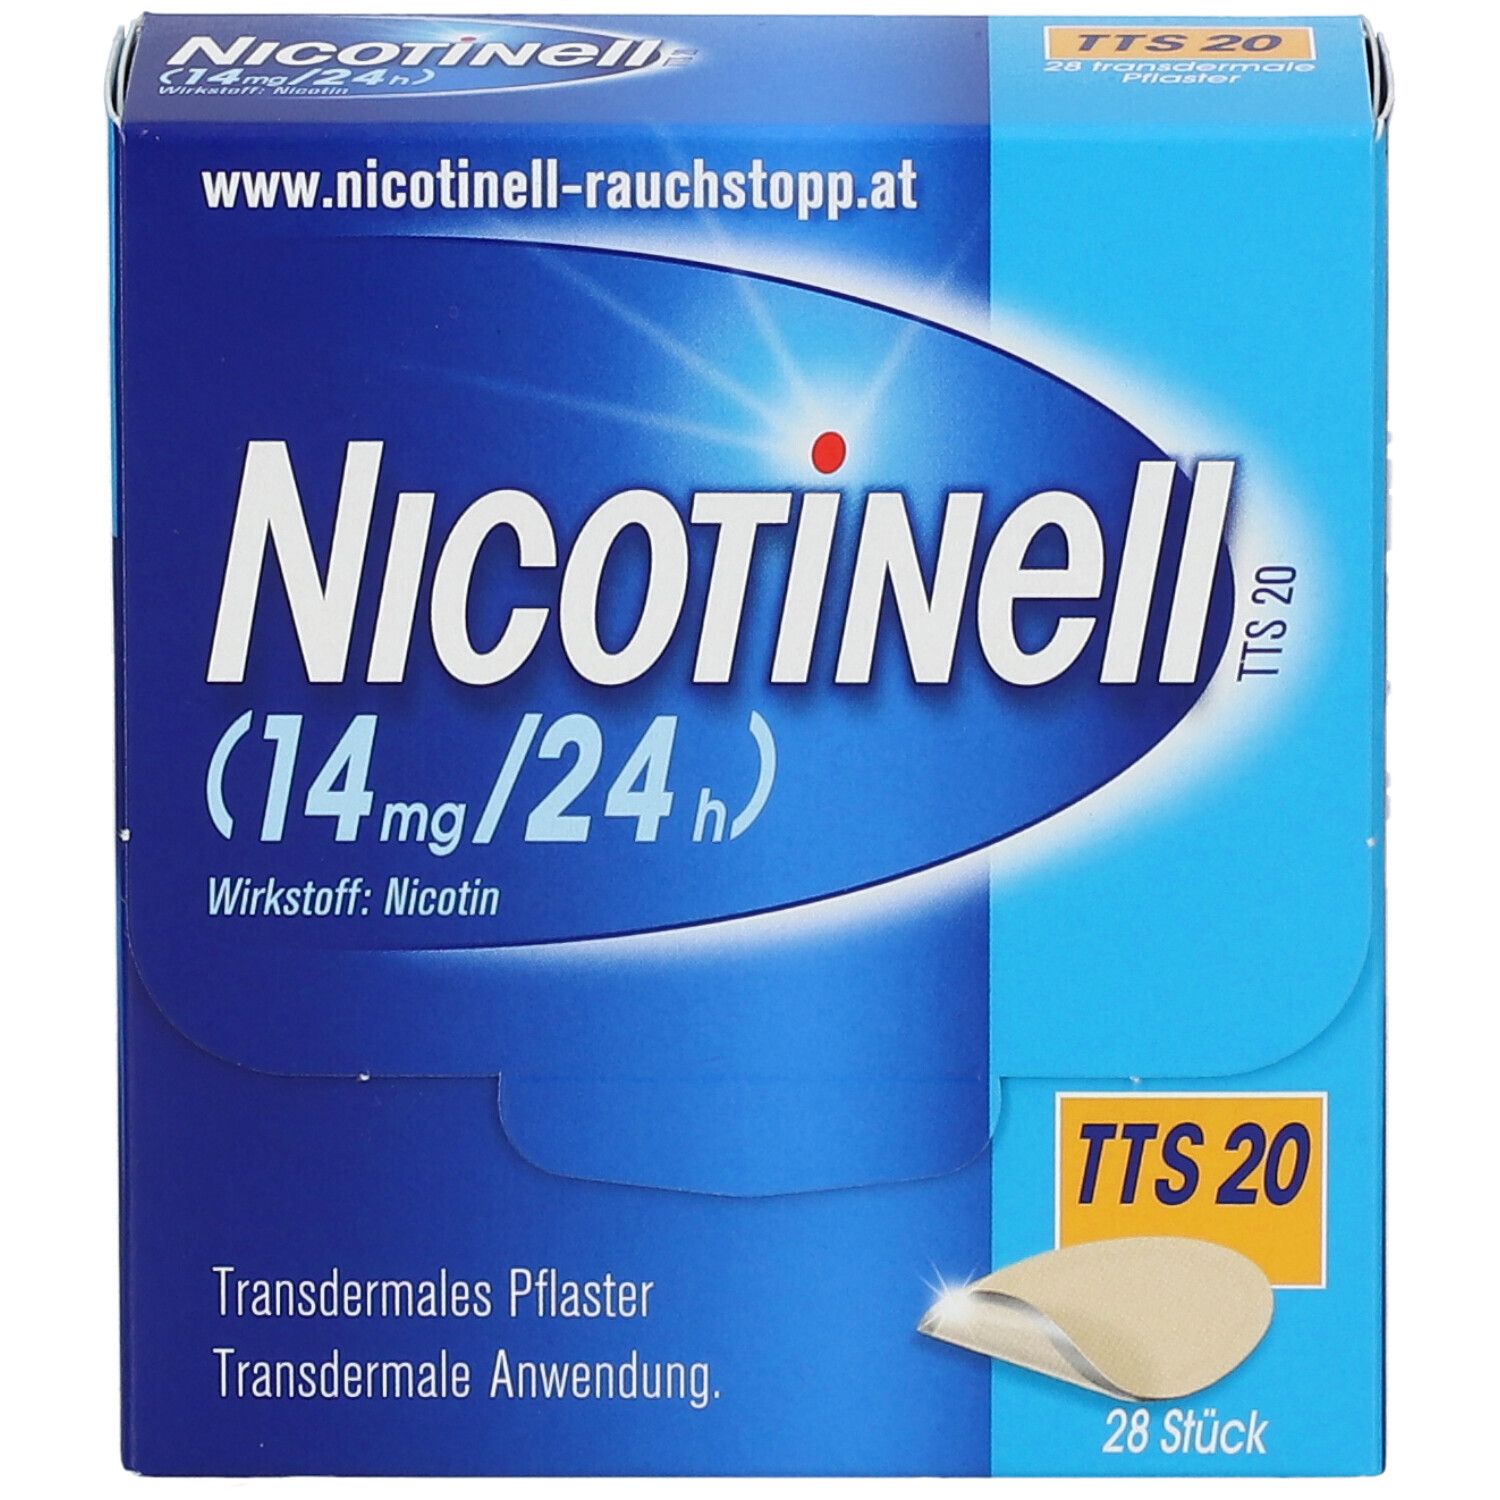 NICOTINELL® Transdermales Pflaster TTS 20